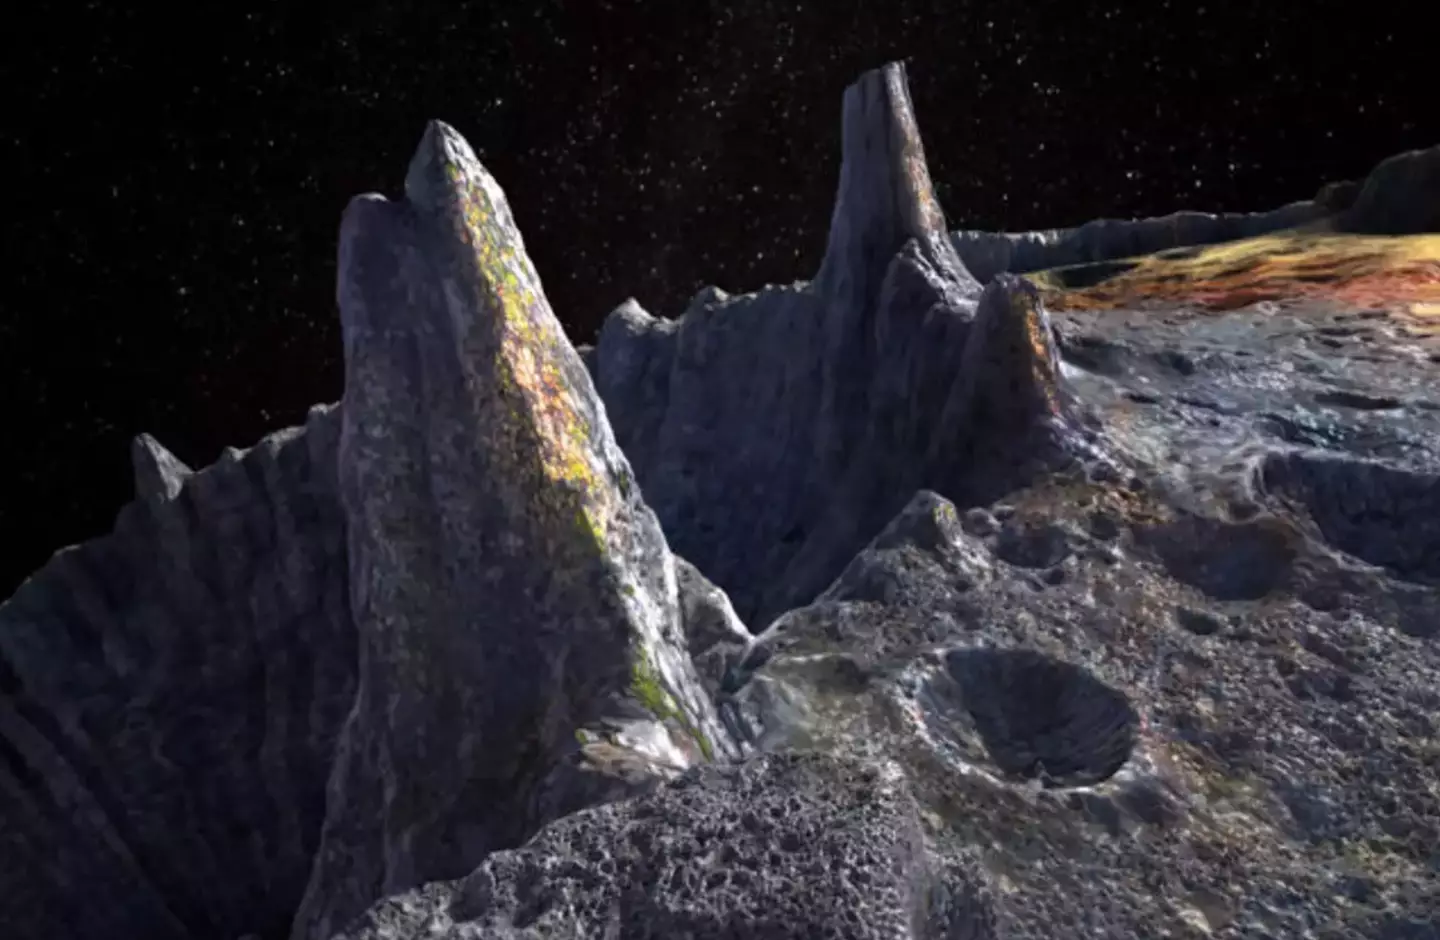 The asteroid is a pretty expensive rock.